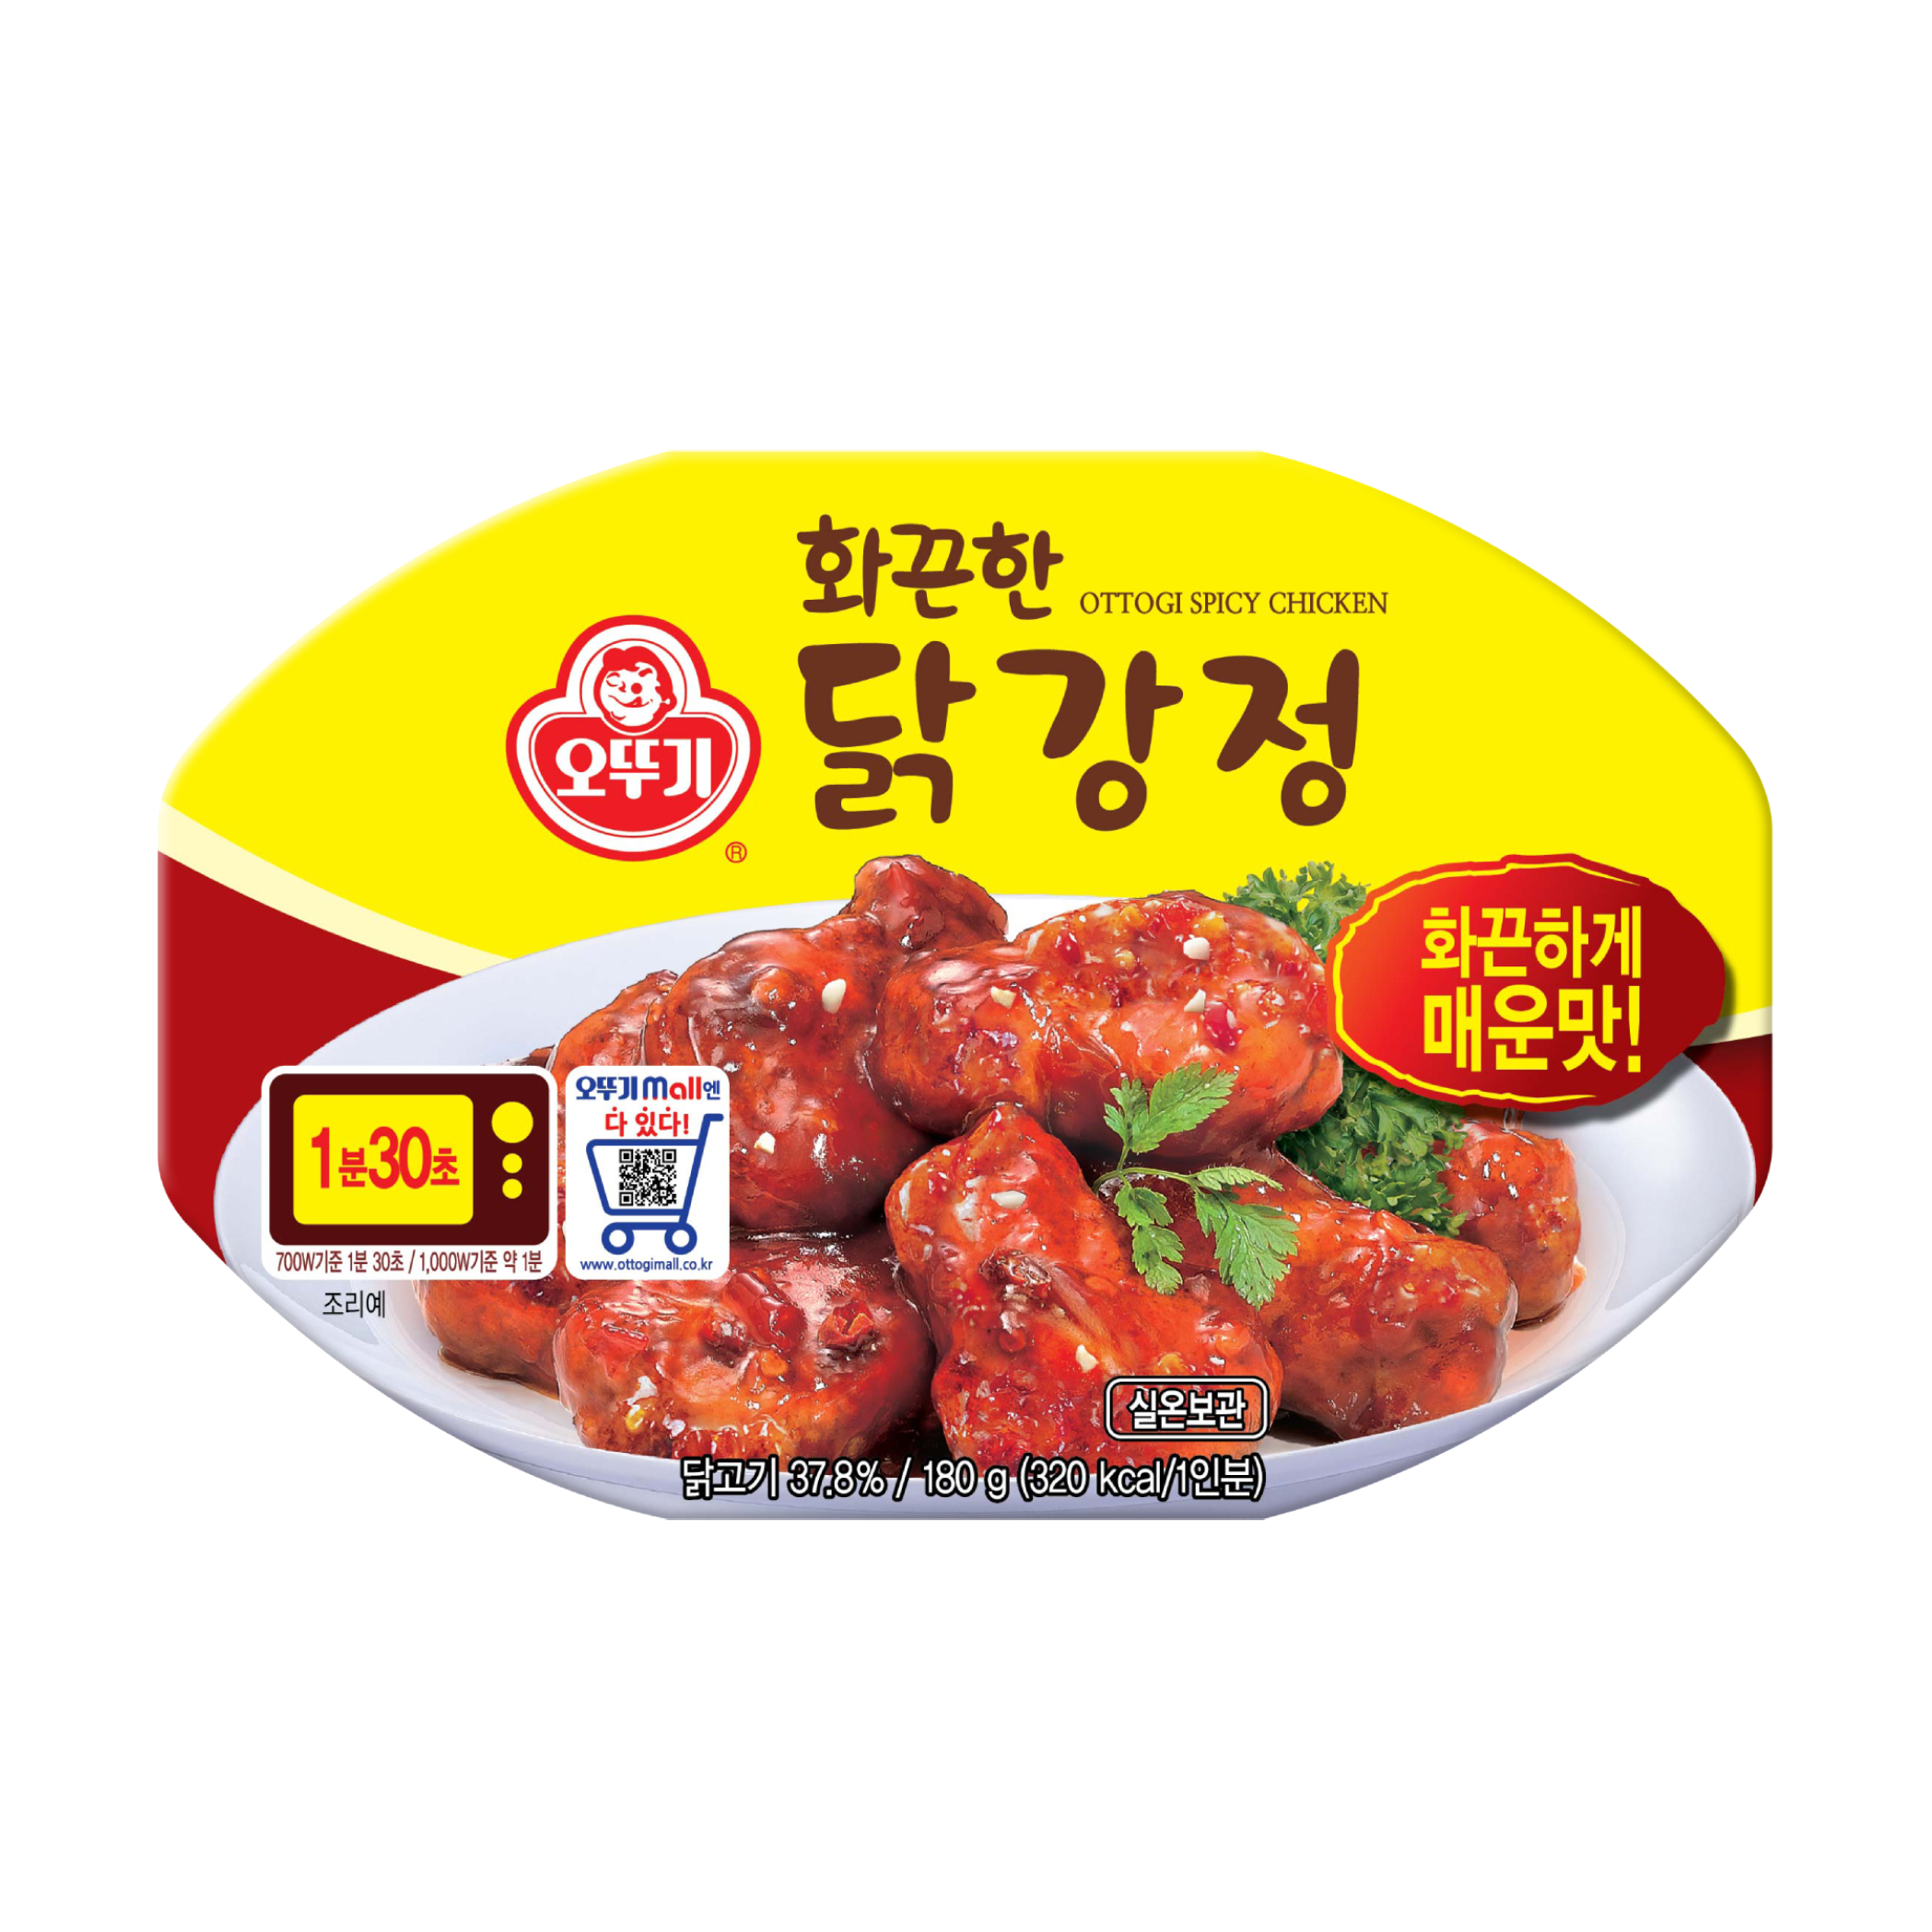 SPICY CHICKEN GANGJEONG